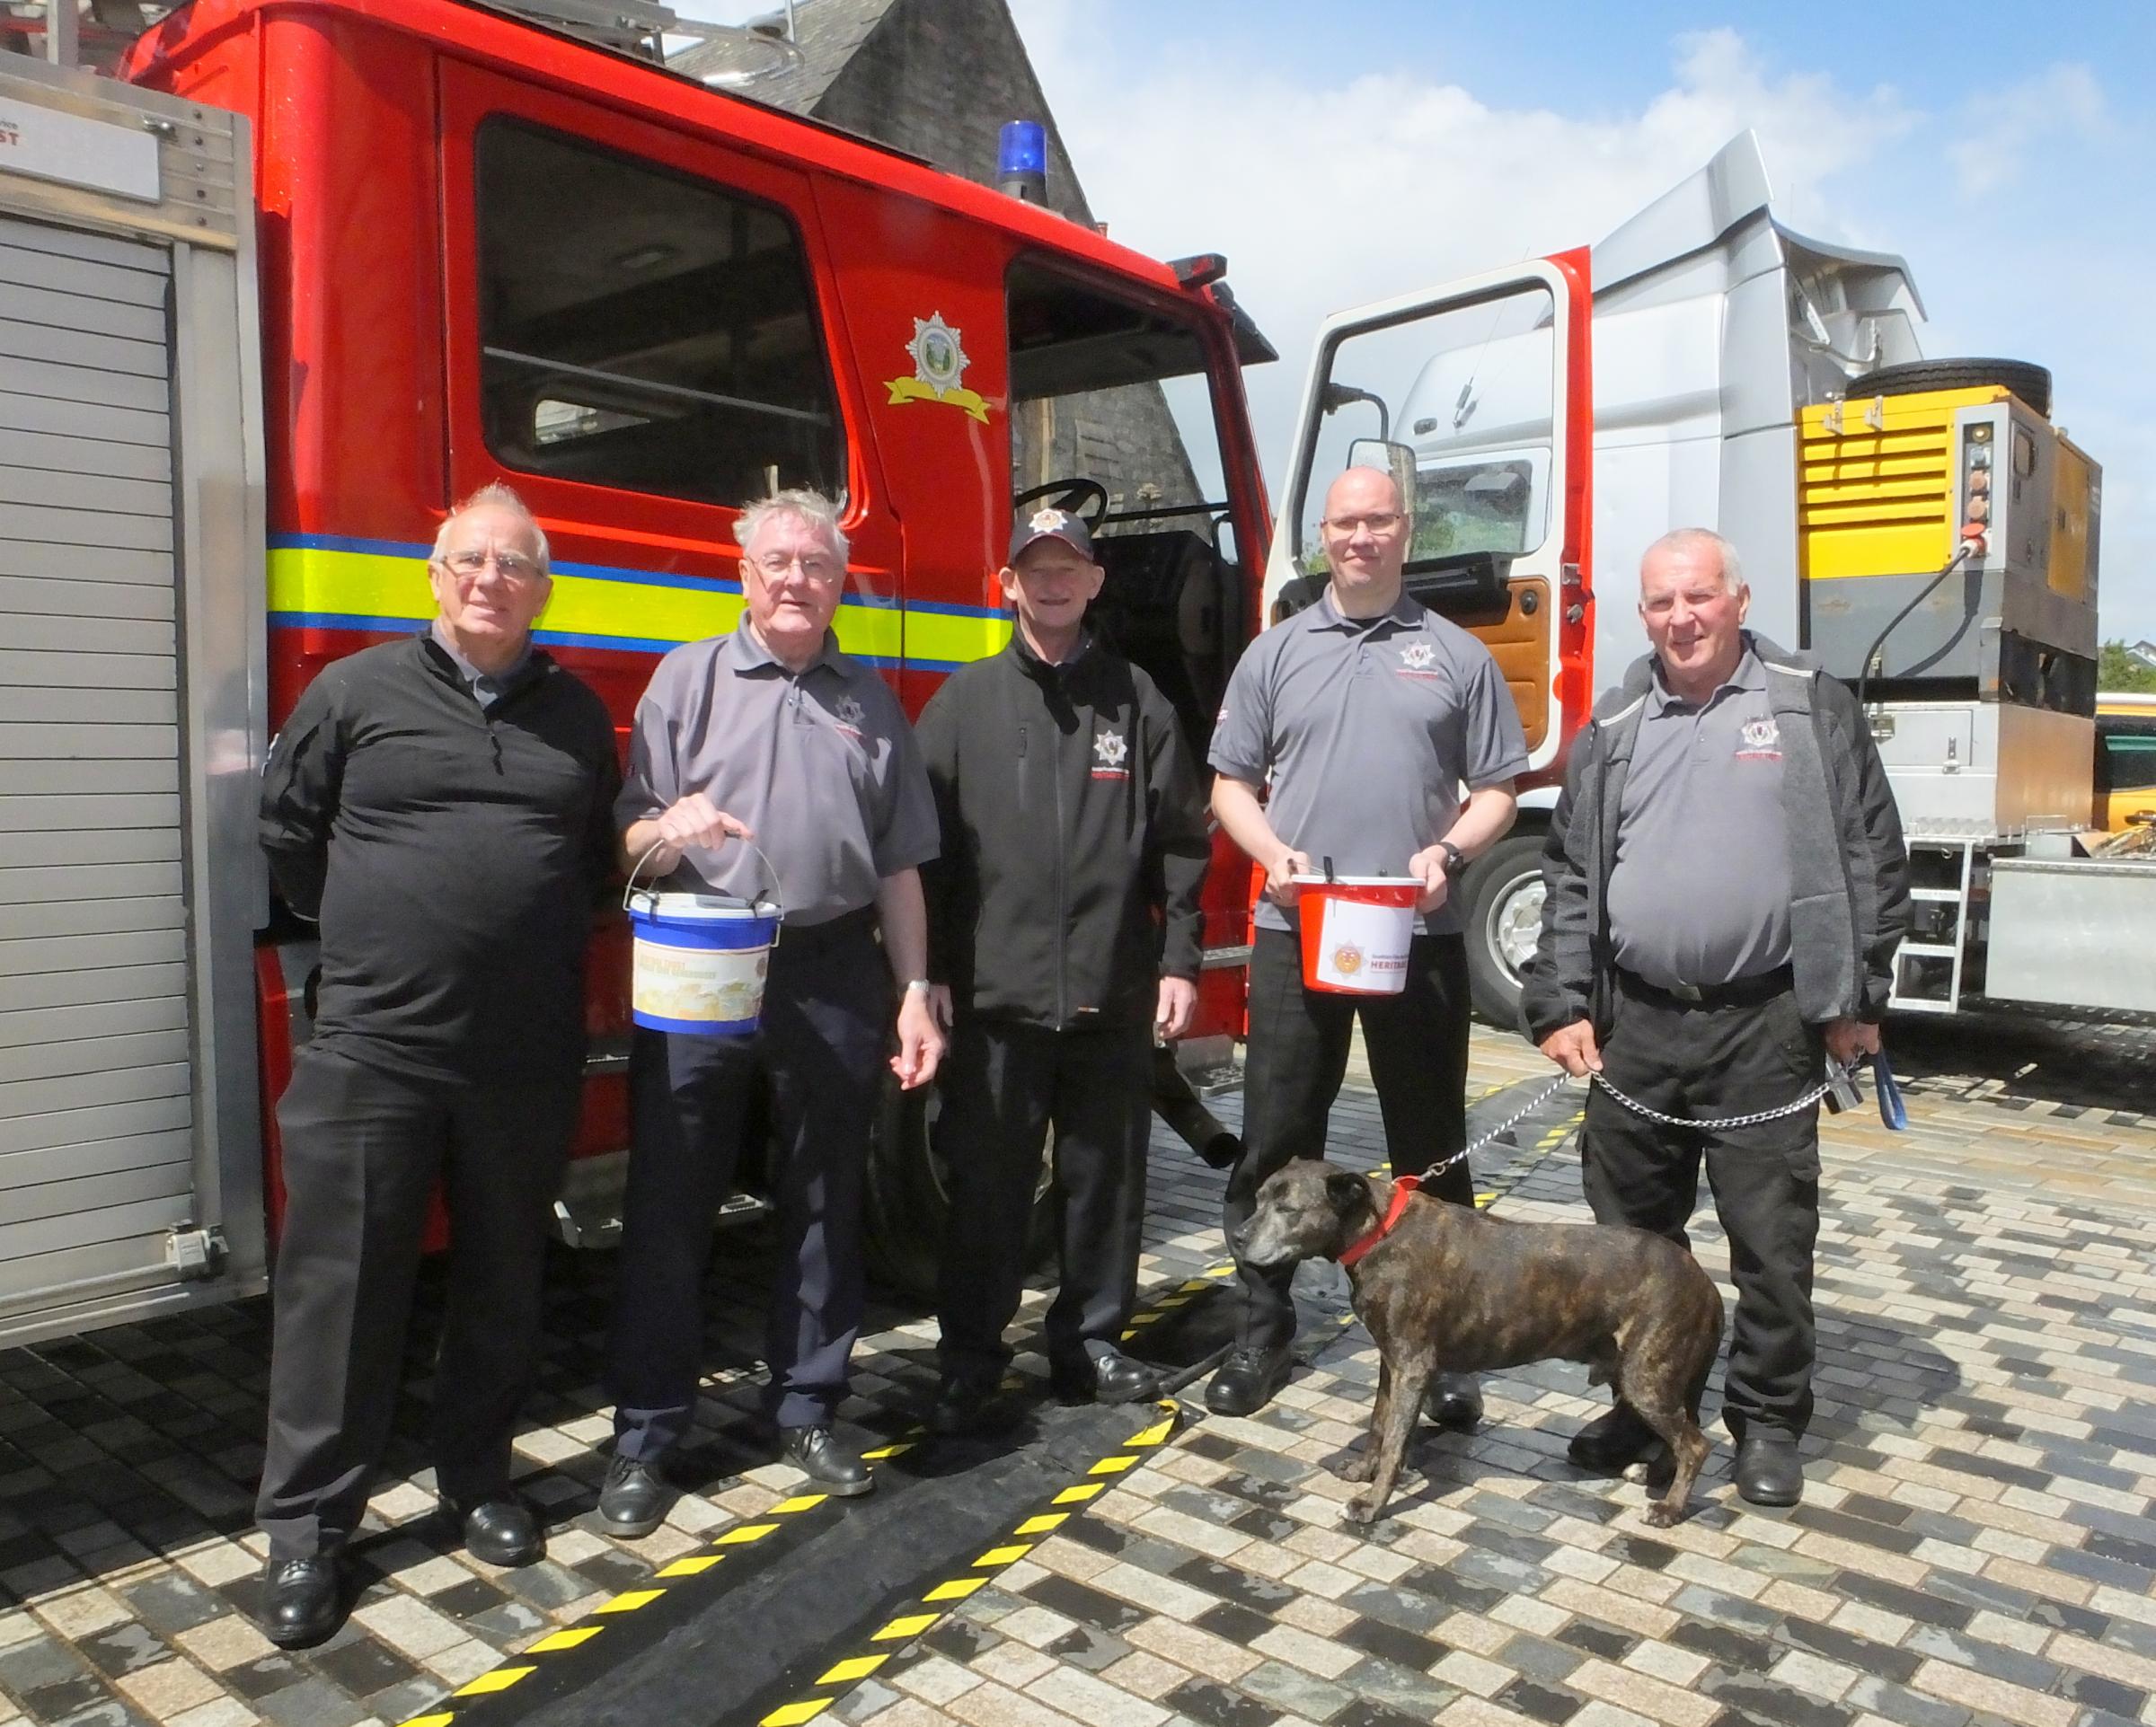 Volunteers from the Scottish Fire and Rescue Service Museum and Heritage Centre